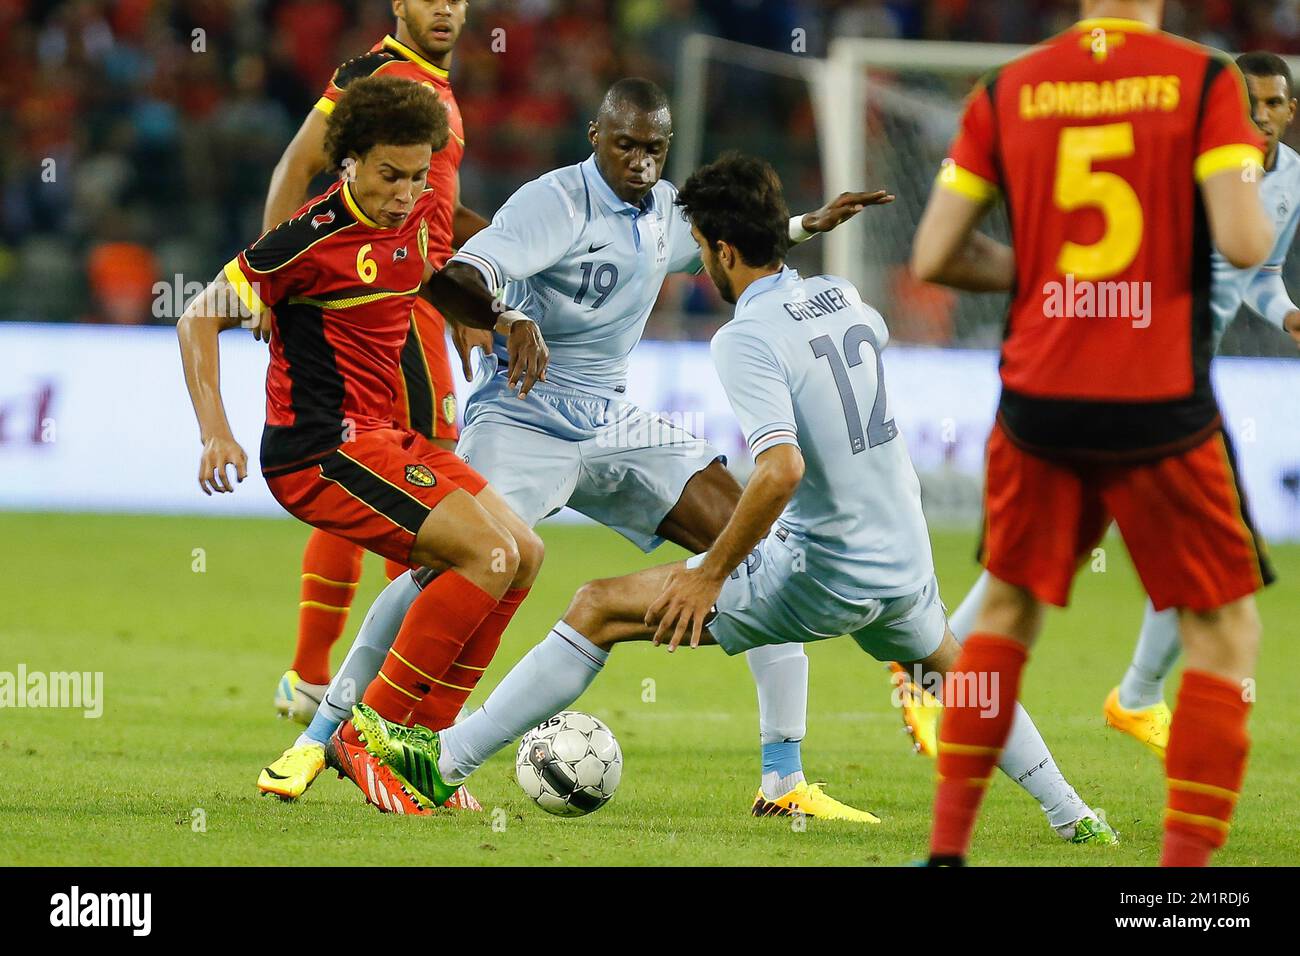 Belgium's Axel Witsel, French Josuha Guilavogui and French Clement Grenier fight for the ball during a friendly game of the Belgian national soccer team Red Devils against France's national soccer team, Wednesday 14 August 2013, in the King Baudouin Stadium (Stade Roi Baudouin/Koning Boudewijnstadion), in Brussels.  Stock Photo